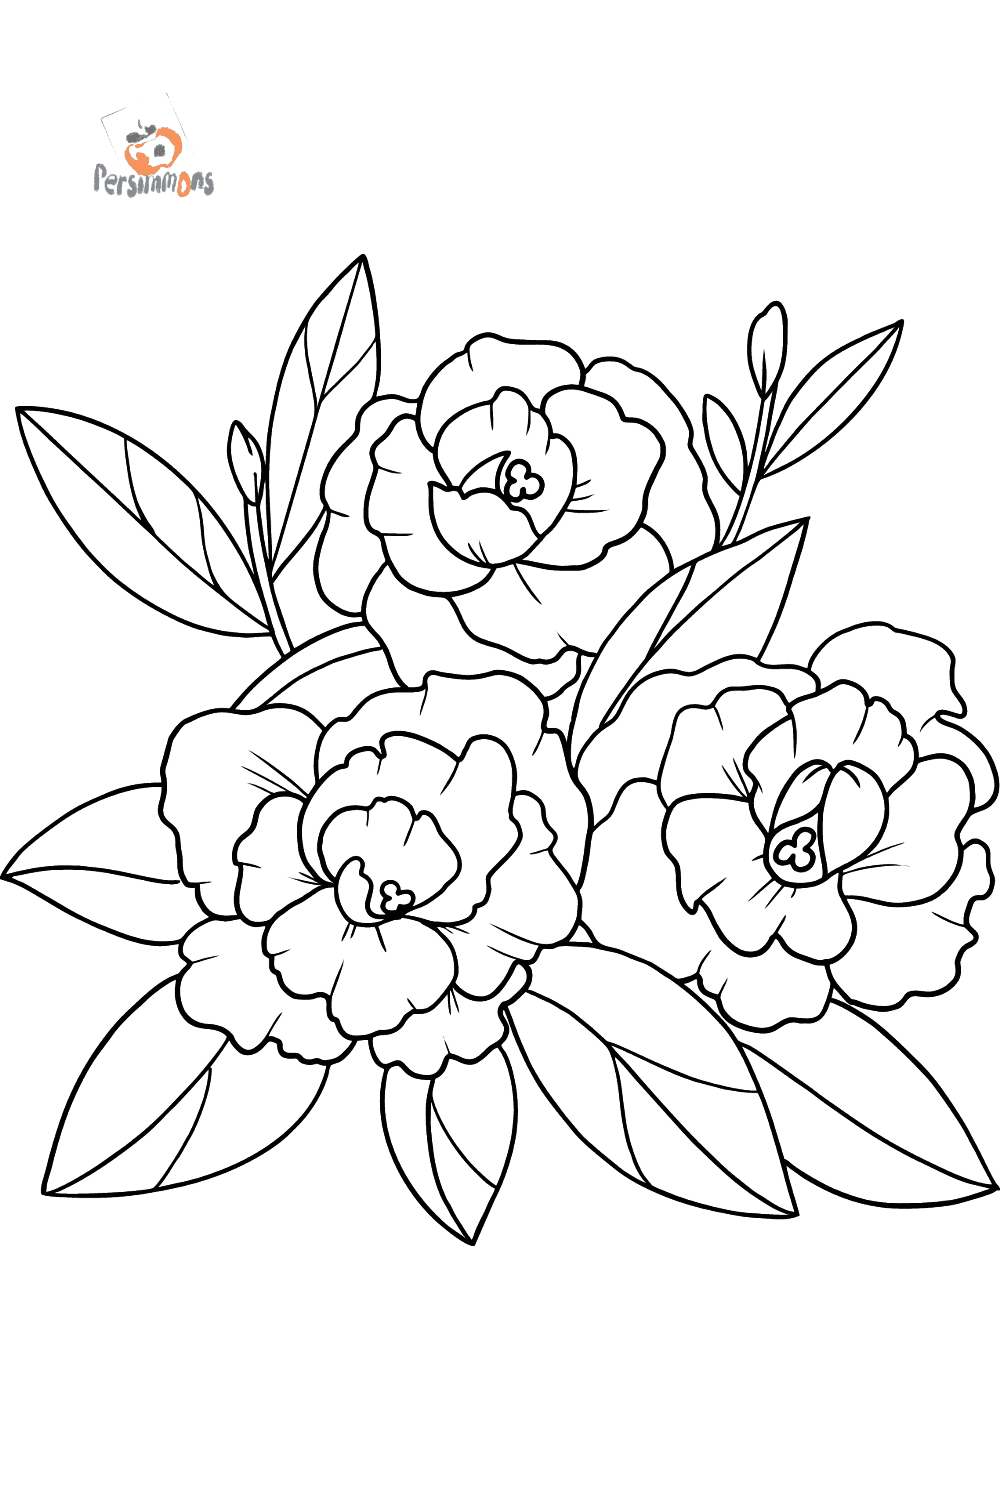 Flower coloring page â a peony blossom